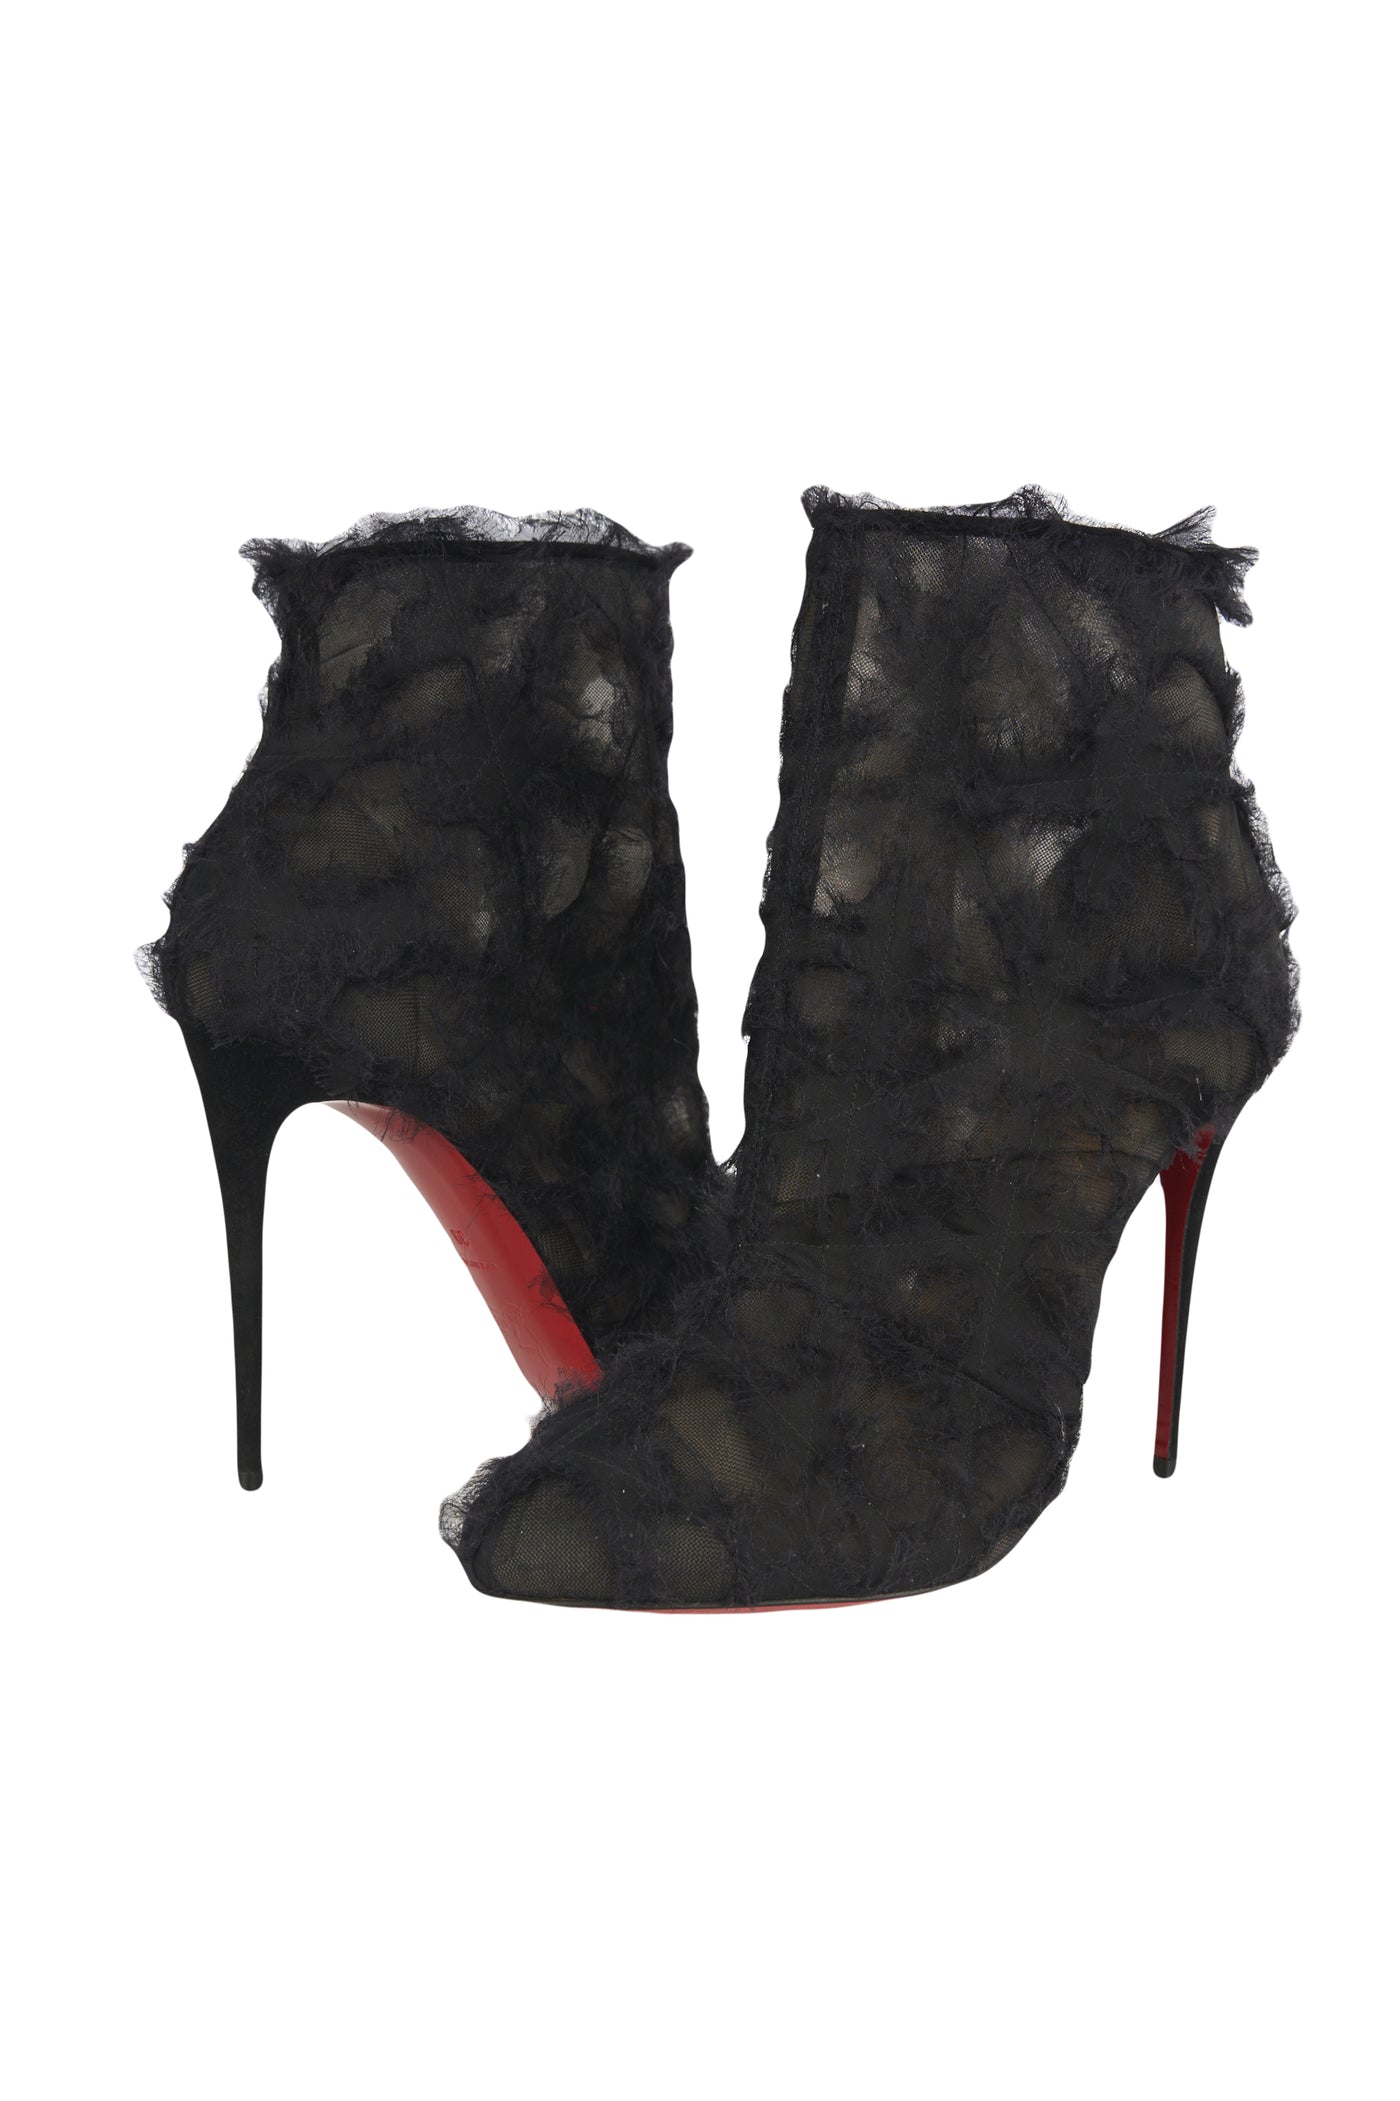 Christian LOUBOUTIN mesh see through boots size 39 never worn